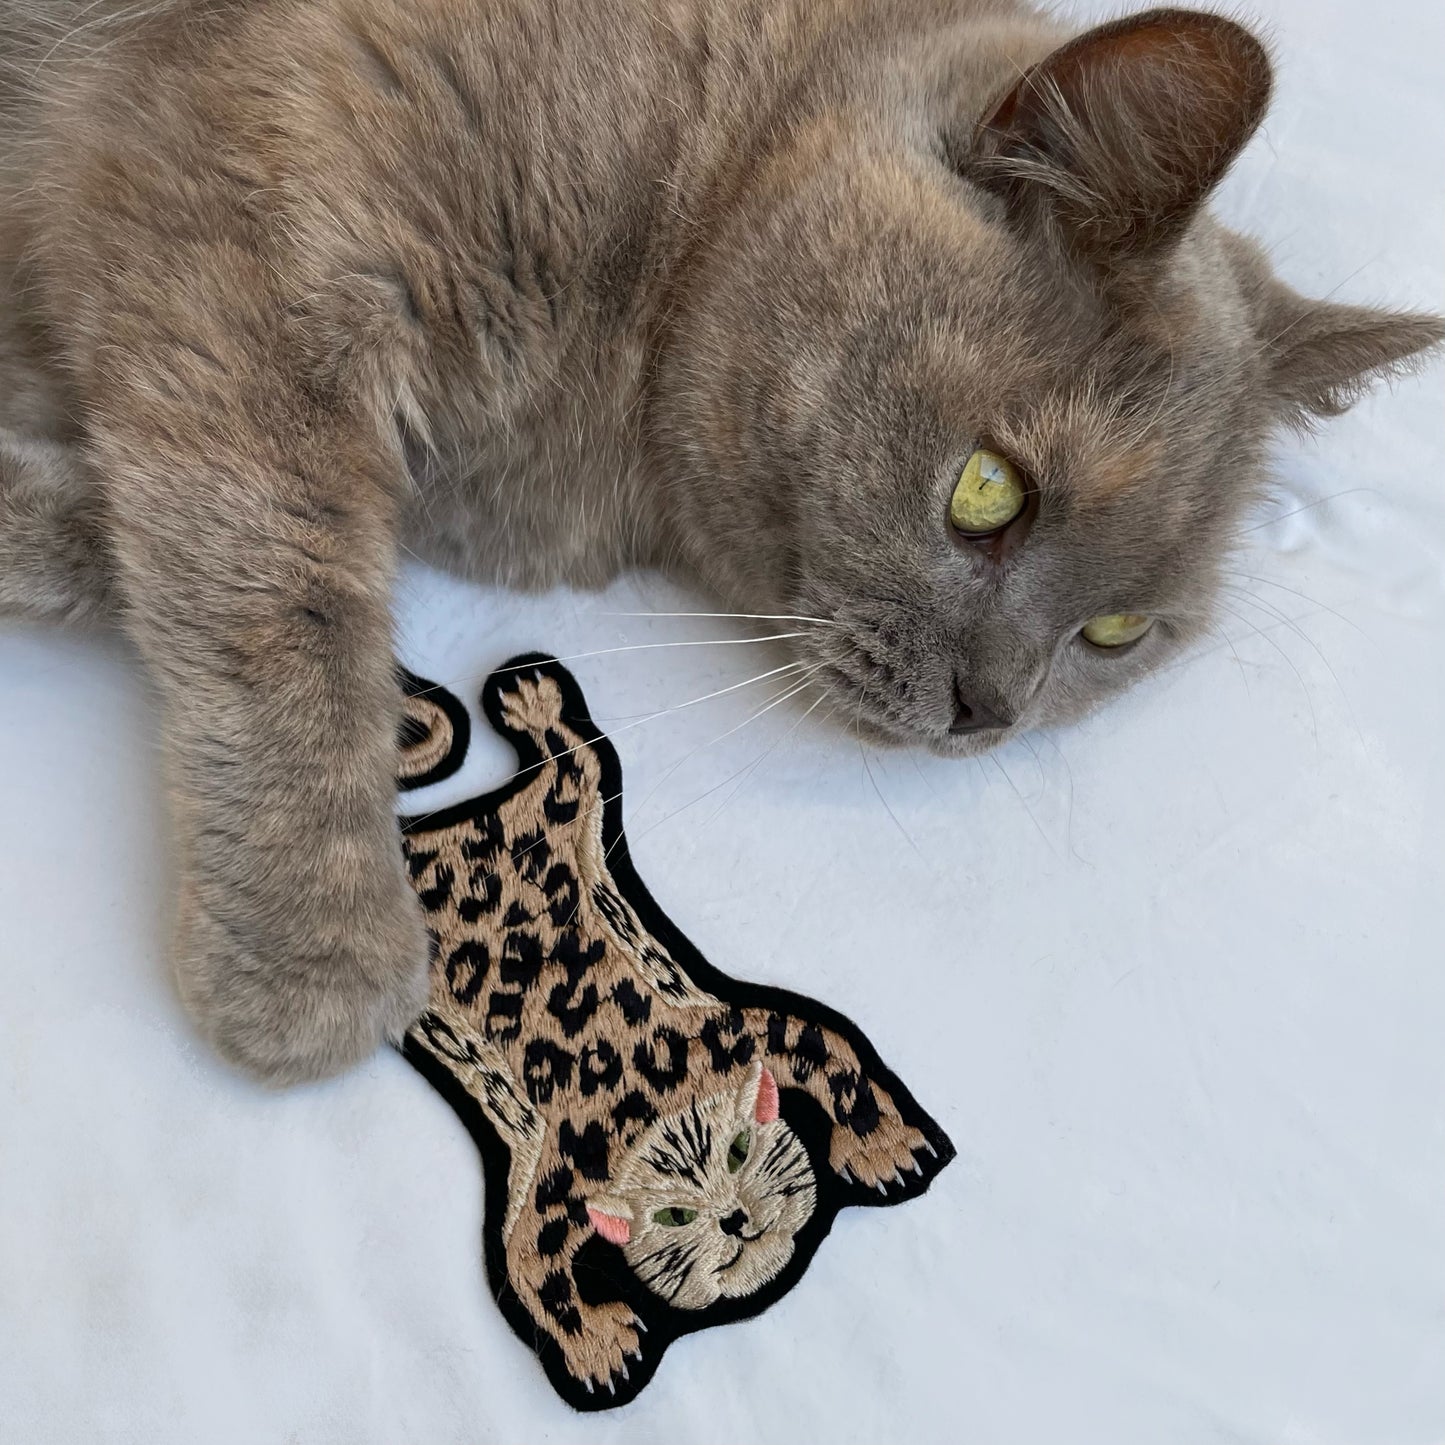 Leopard embroidered patch on white back ground with british short haired cat, lying on its side with one paw on the patch